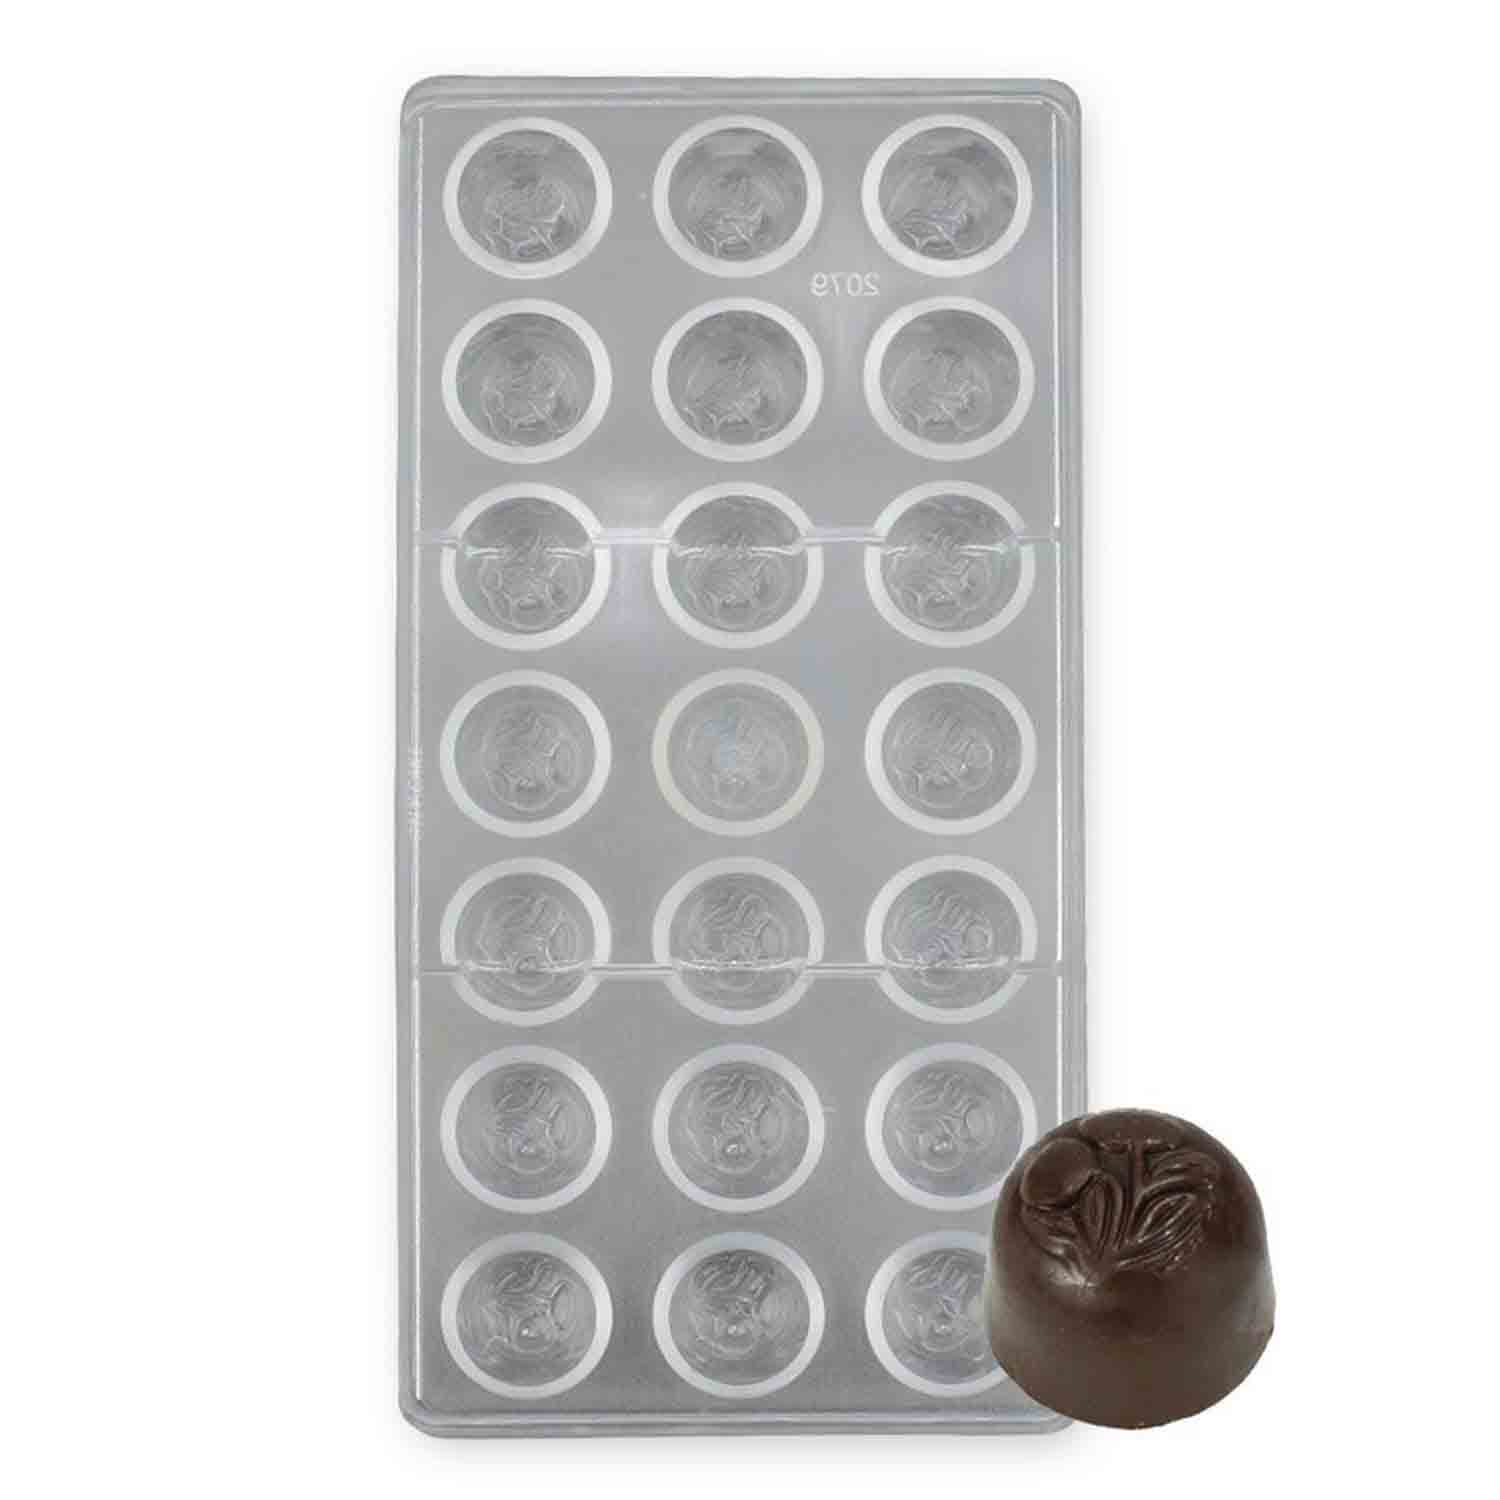 How to Prep & Use a Candy Mold - Better Your Bake by Nielsen-Massey